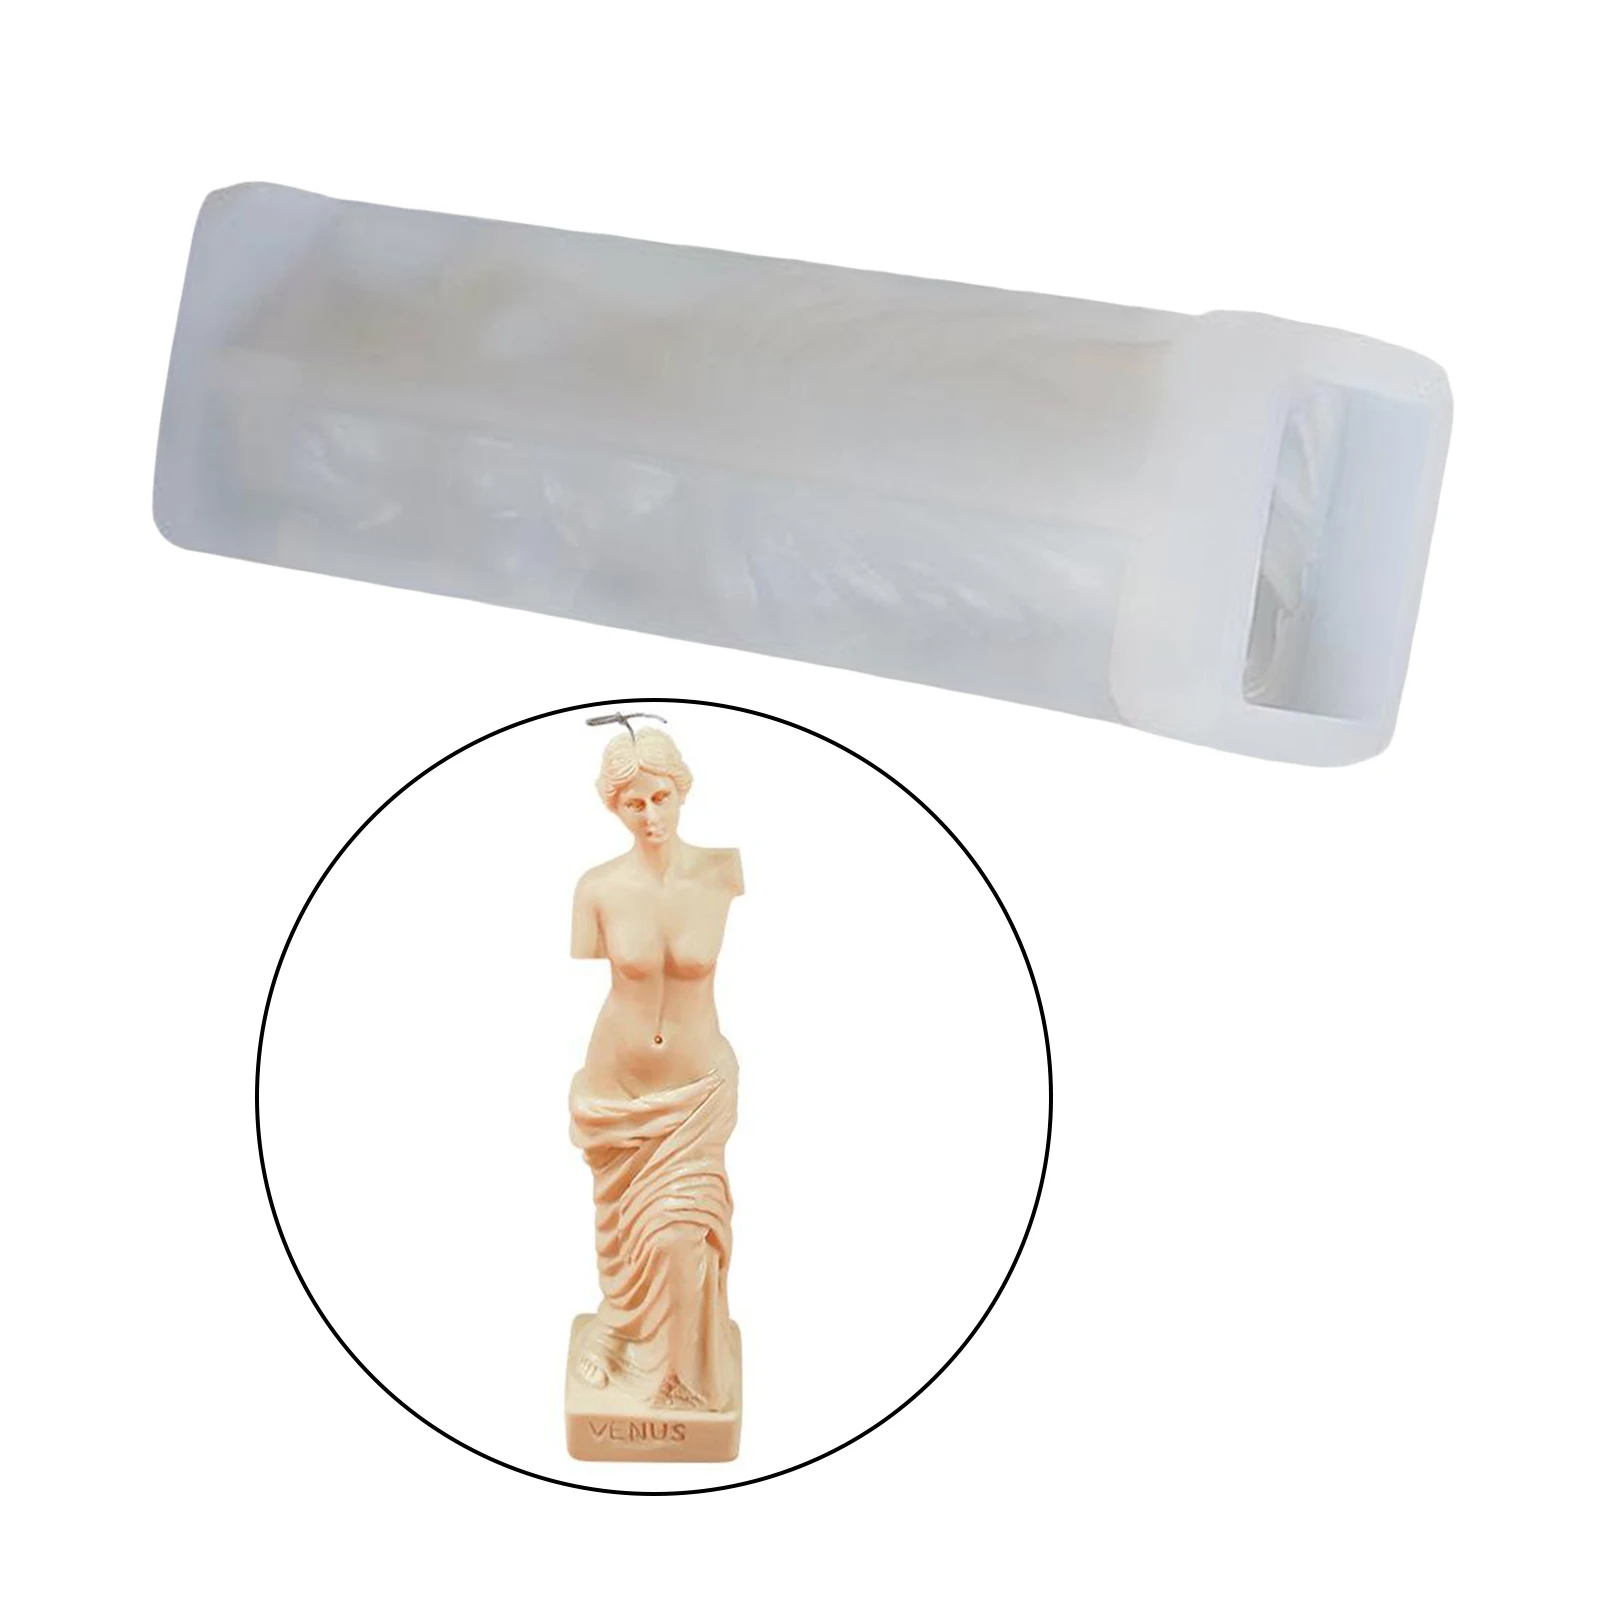 Resin Candle Molds, Goddess Silicone Molds Resin Epoxy Resin Casting Art Molds for DIY Soap Aromatherapy Wax Molds Gifts